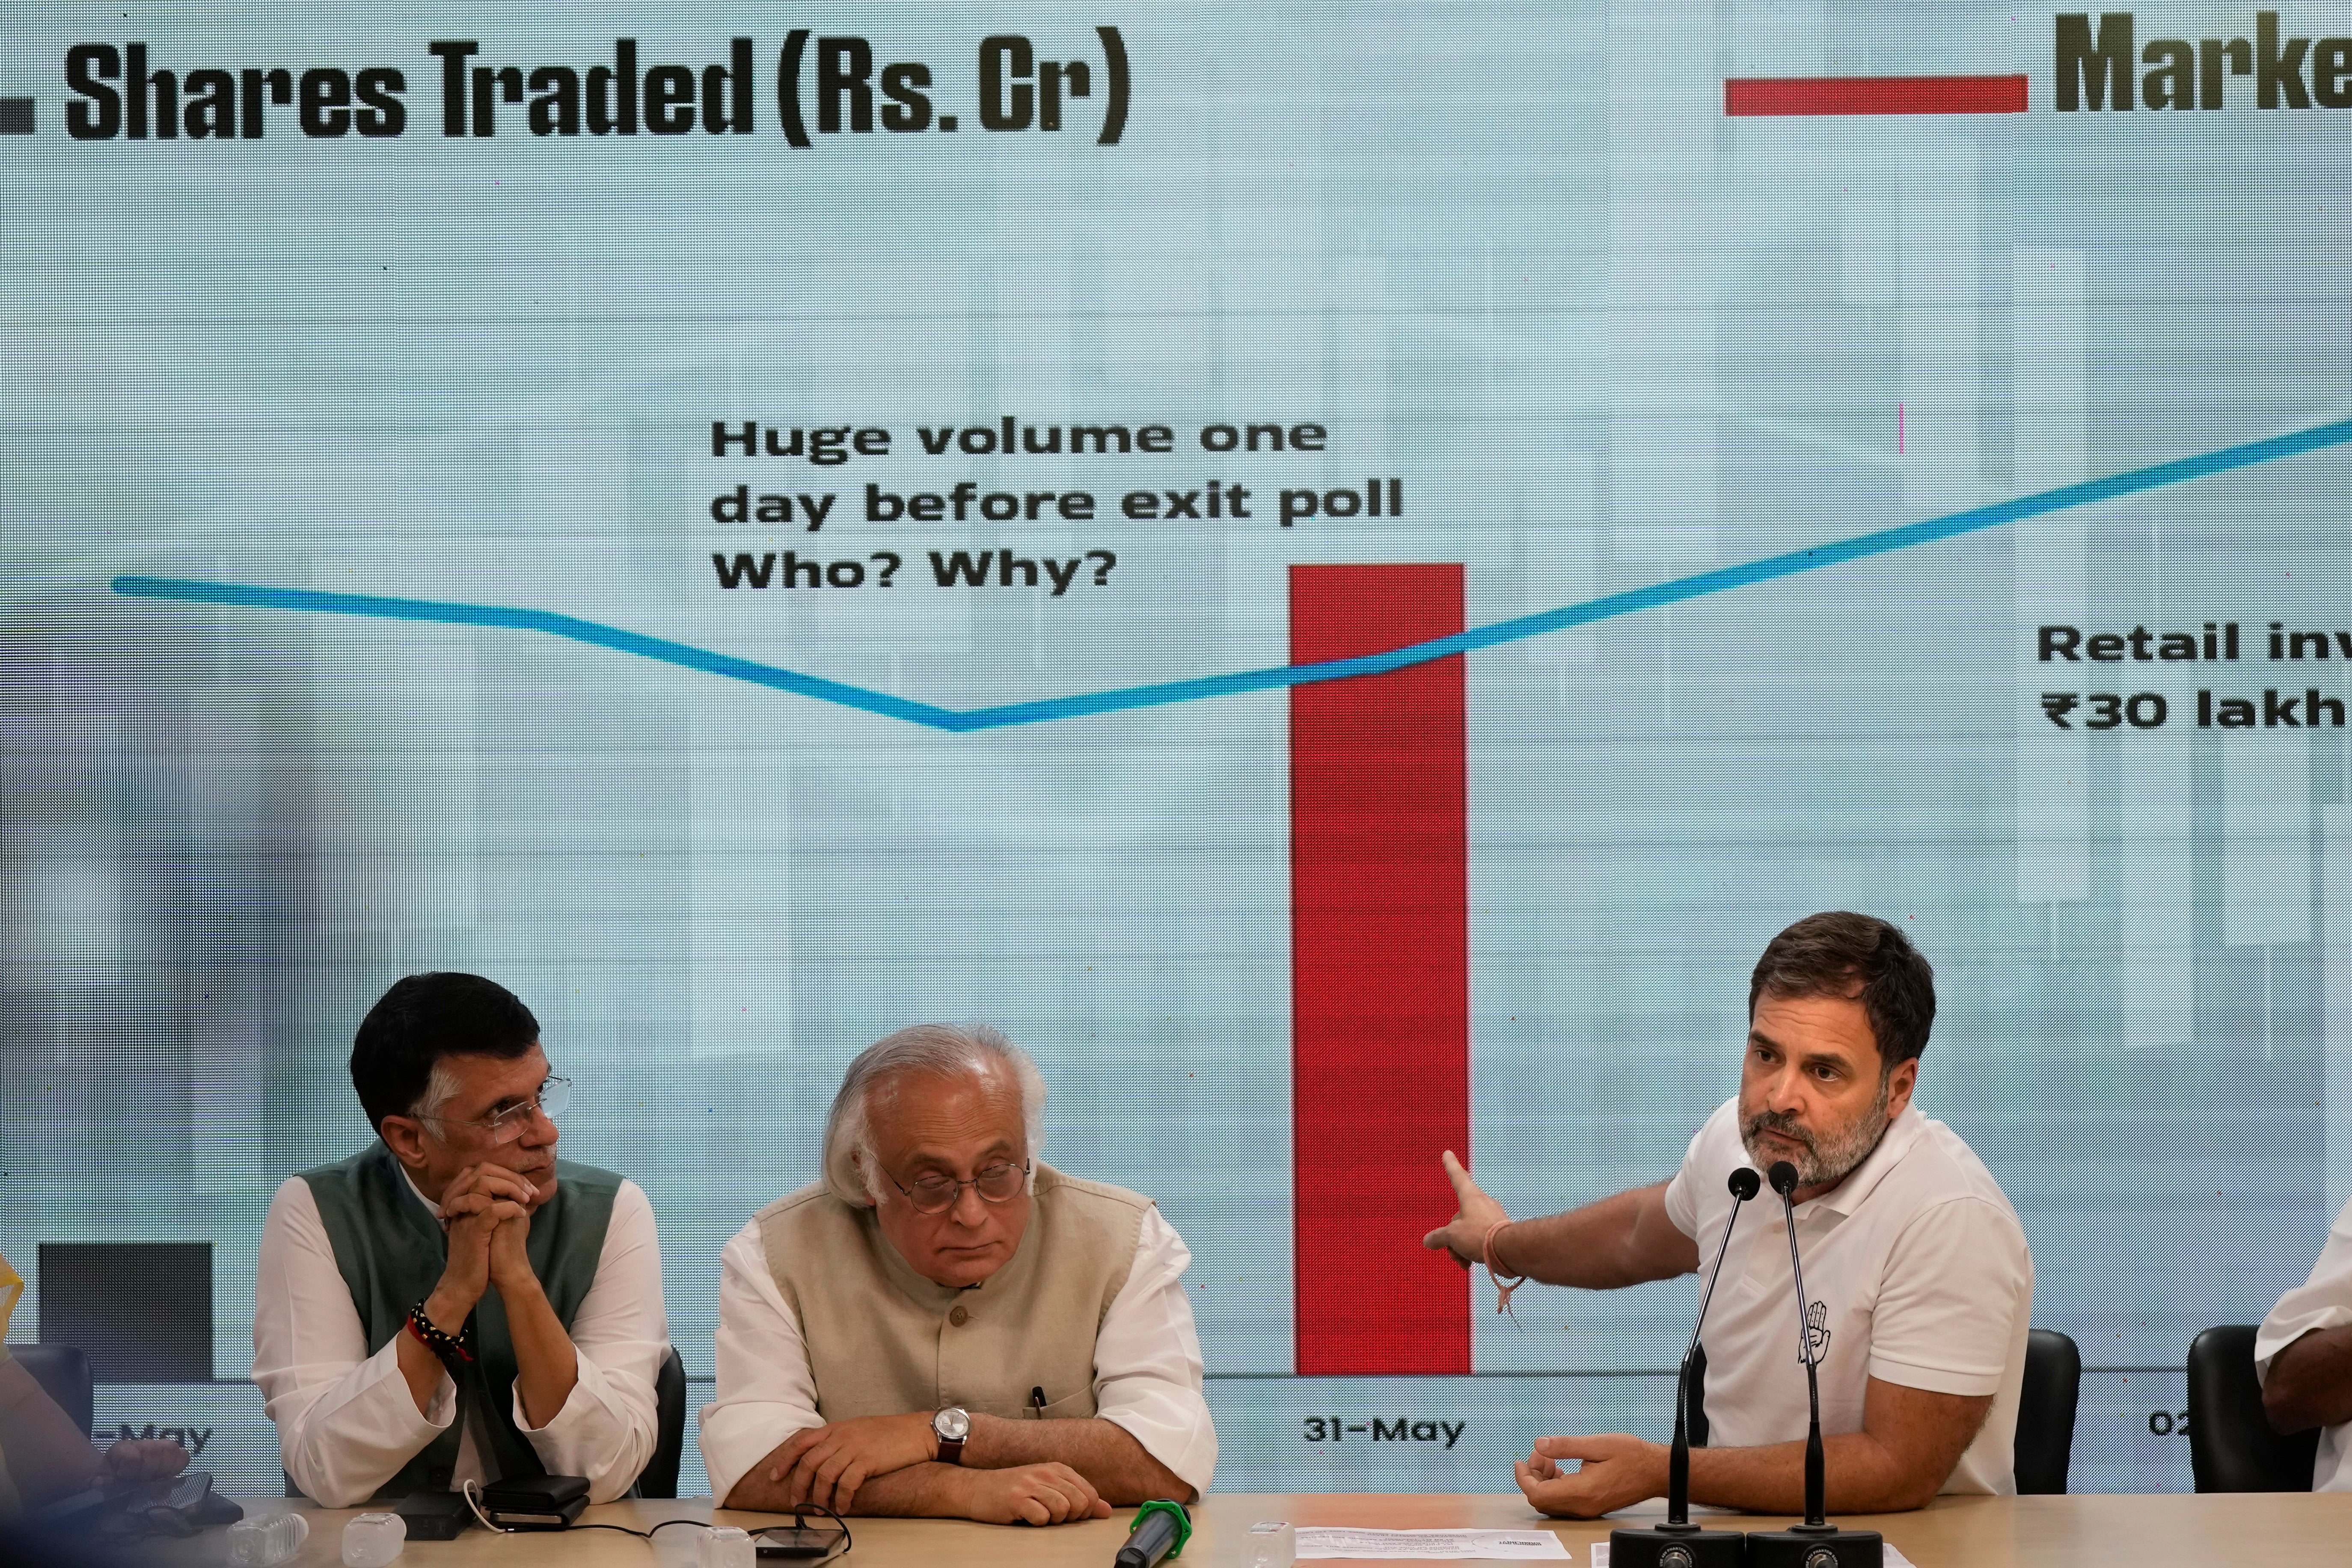 Congress party leader Rahul Gandhi, right, shows a stock market movement chart on a screen during a press conference in New Delhi, India, Thursday, 6 June 2024